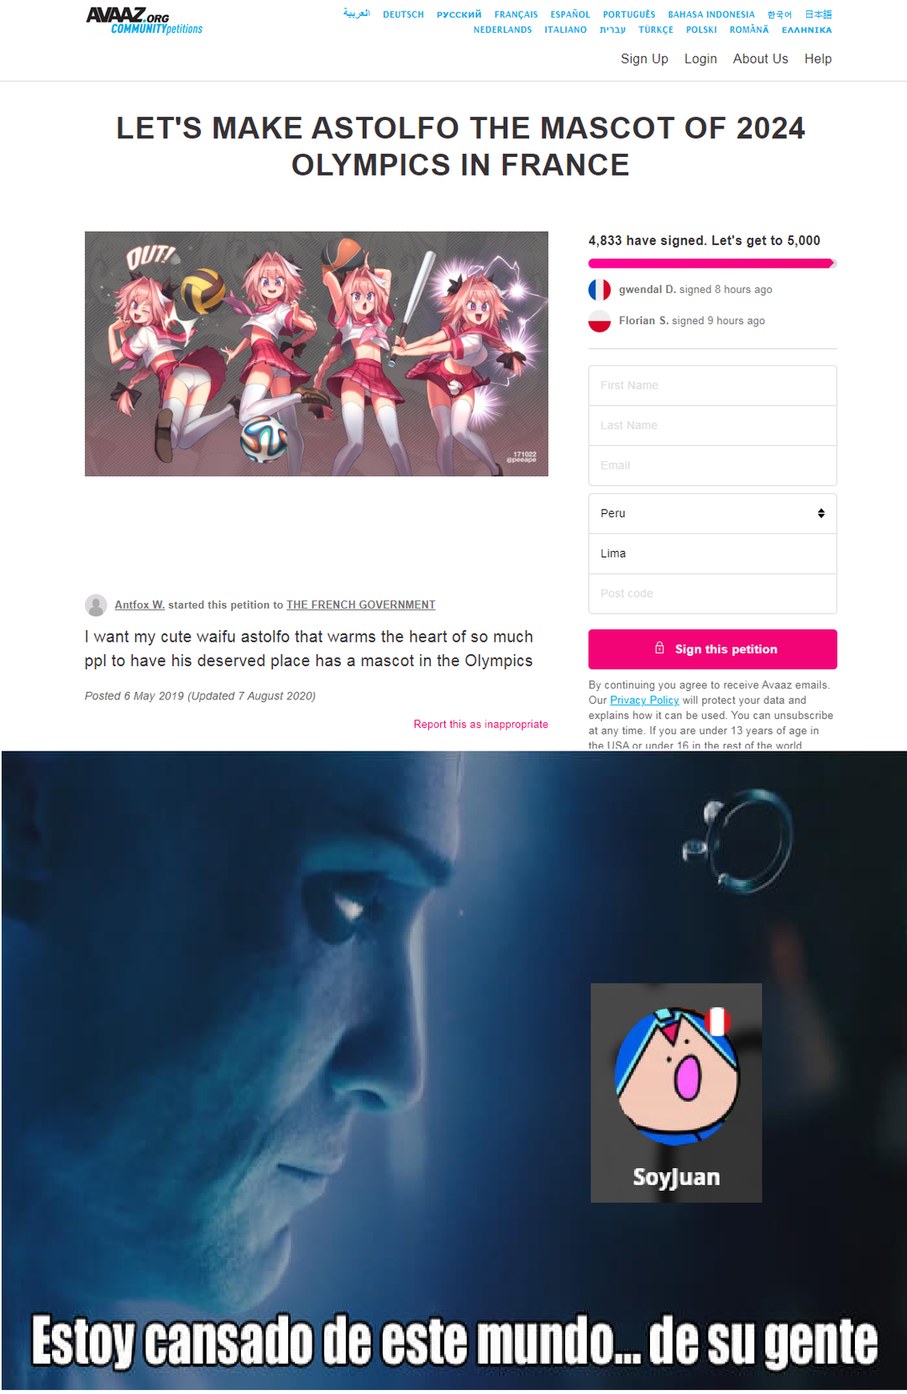 No es feik busquenlo --->https://secure.avaaz.org/community_petitions/en/THE_FRENCH_GOVERNMENT__LETS_MAKE_ASTOLFO_THE_MASCOT_OF_2024_OLYMPICS_IN_FRANCE/ - meme